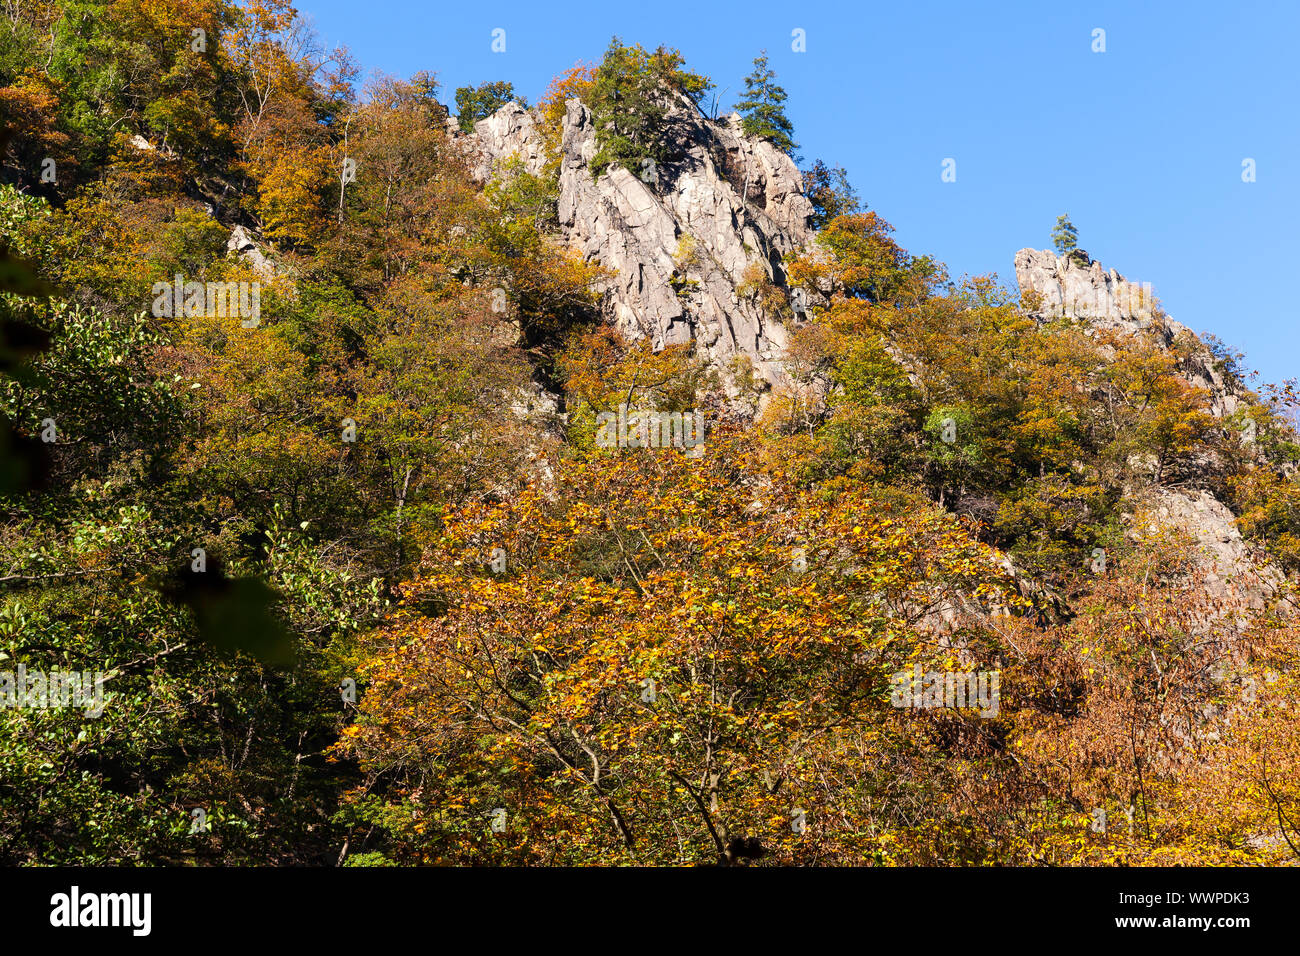 Bodetal Harz Harz witches stairs view of the rocks Stock Photo